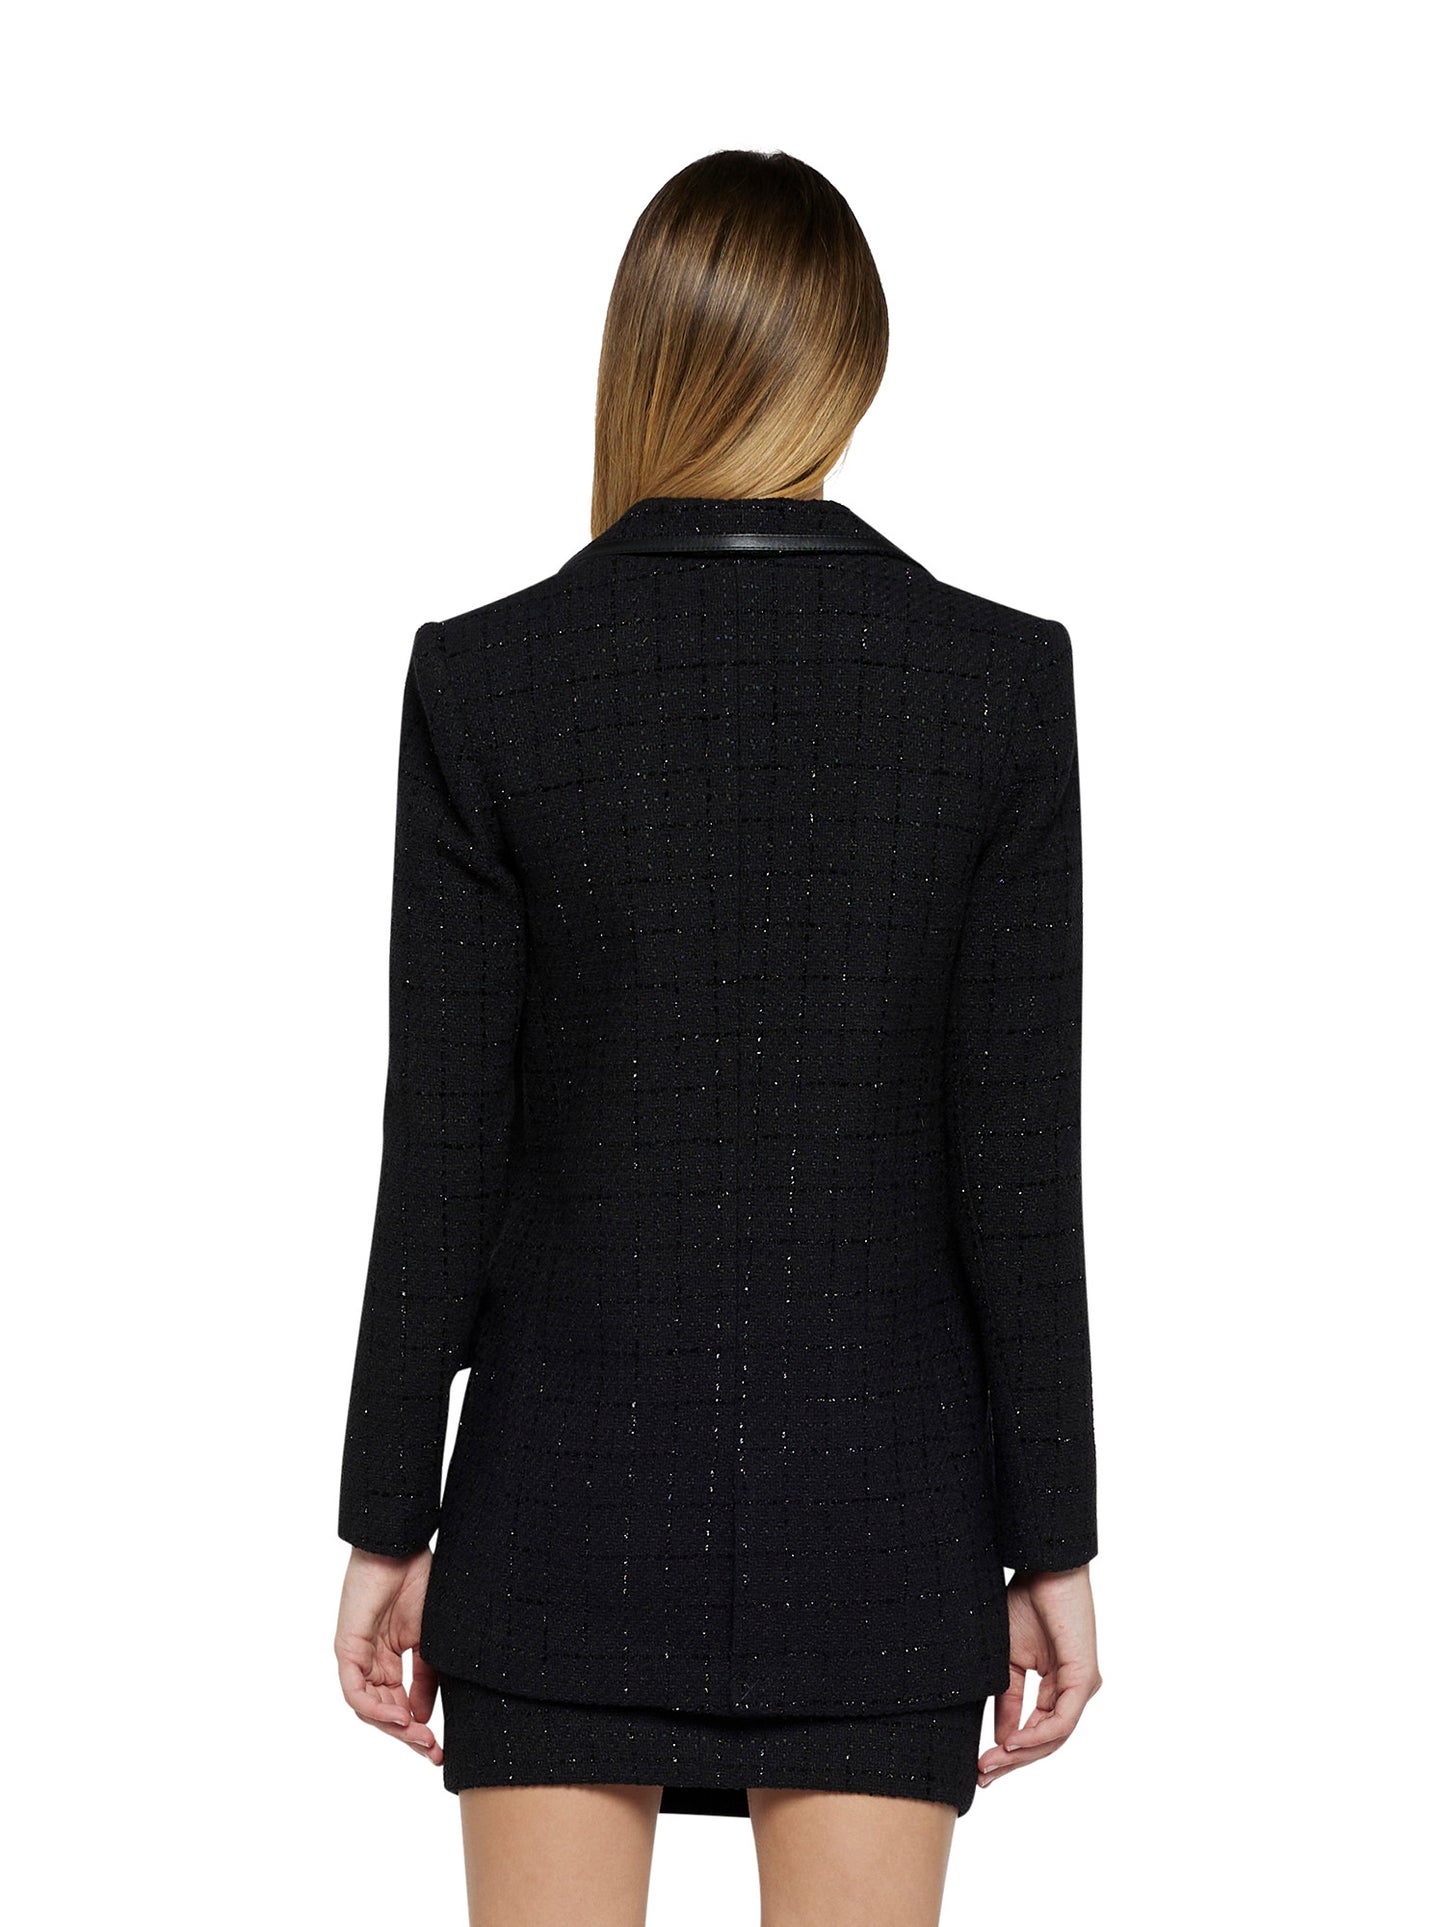 Long jacket in chanel tweed and faux leather piping